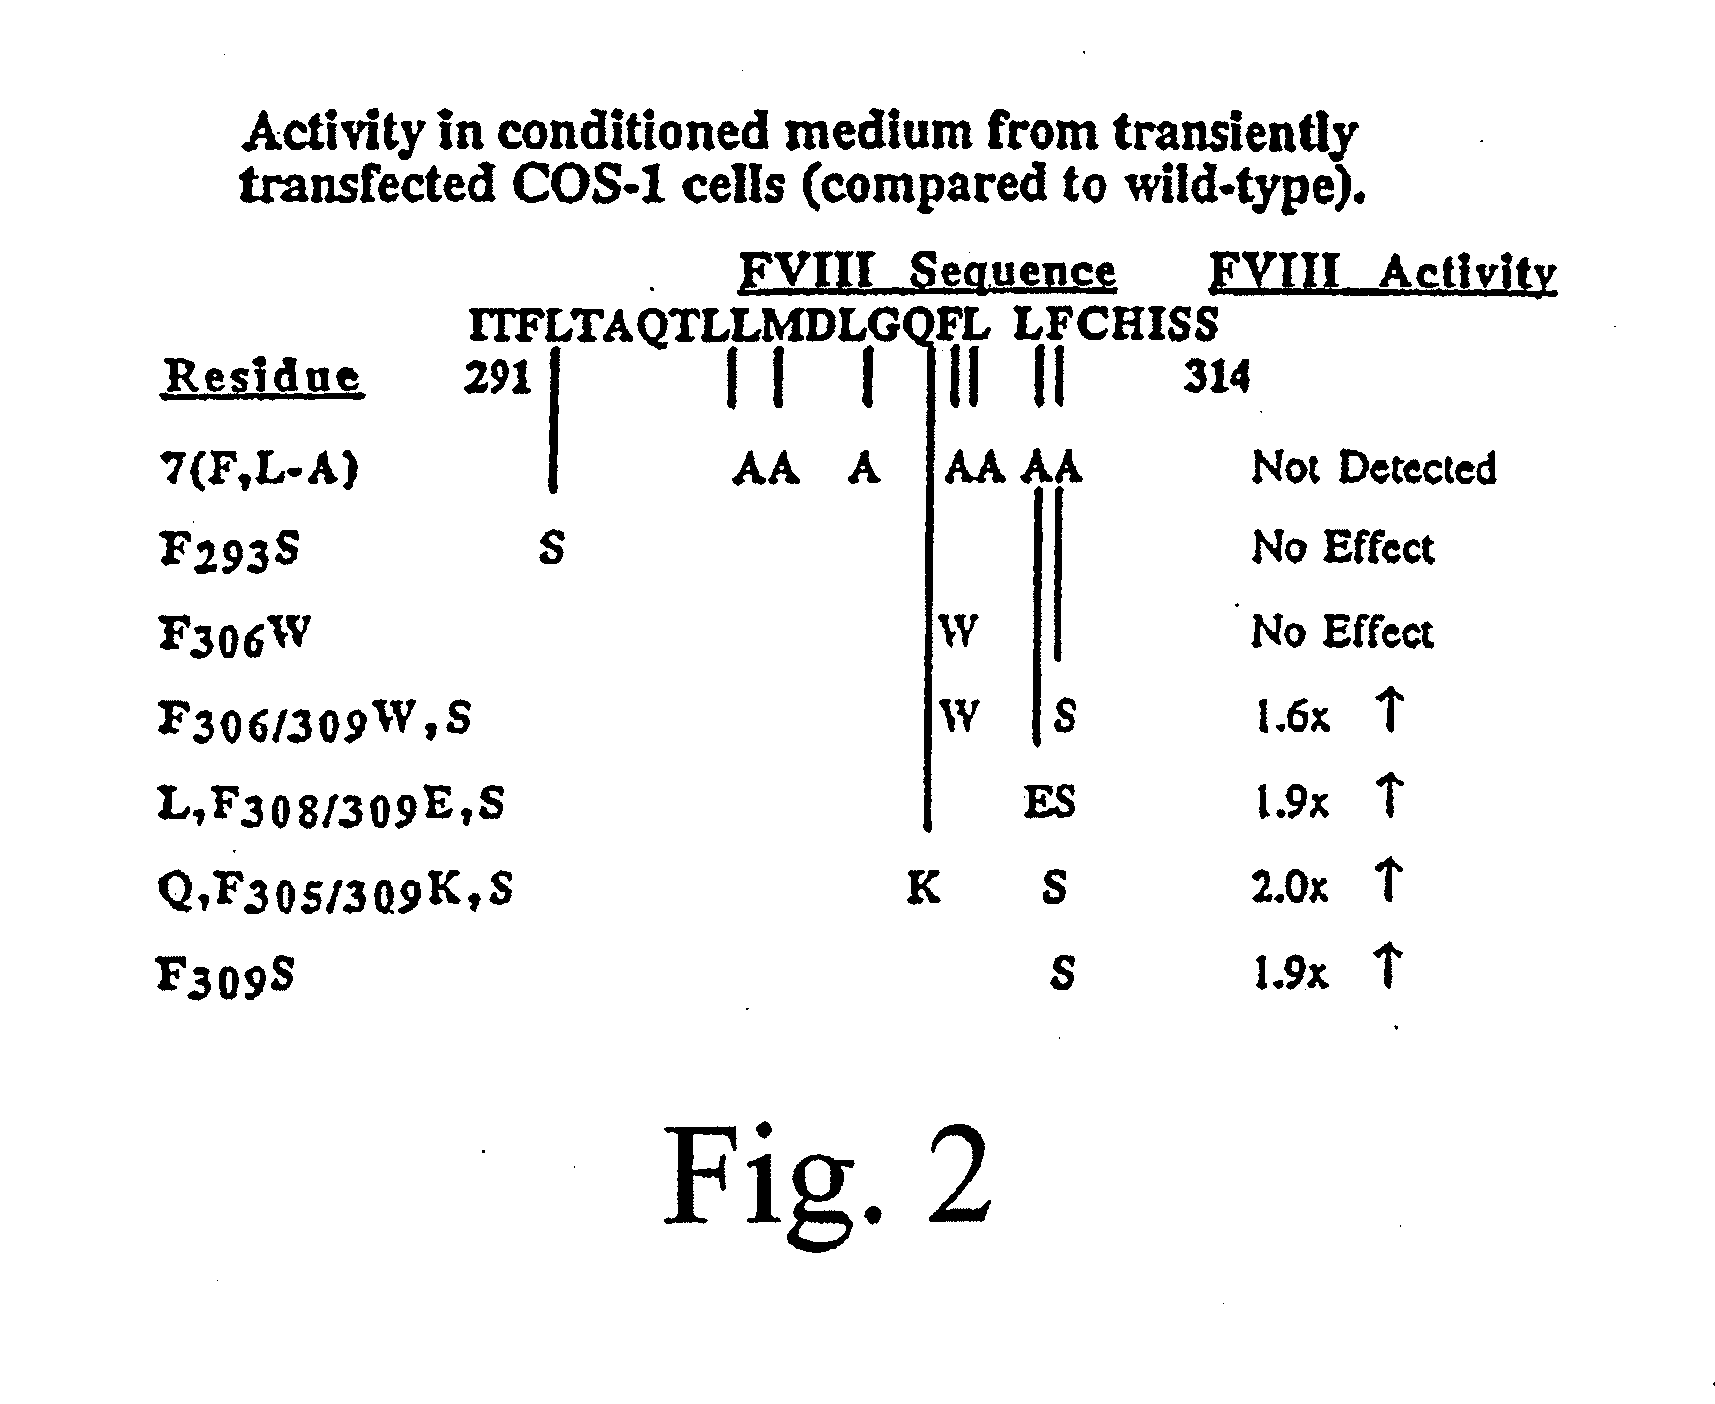 Method of producing factor viii proteins by recombinant methods